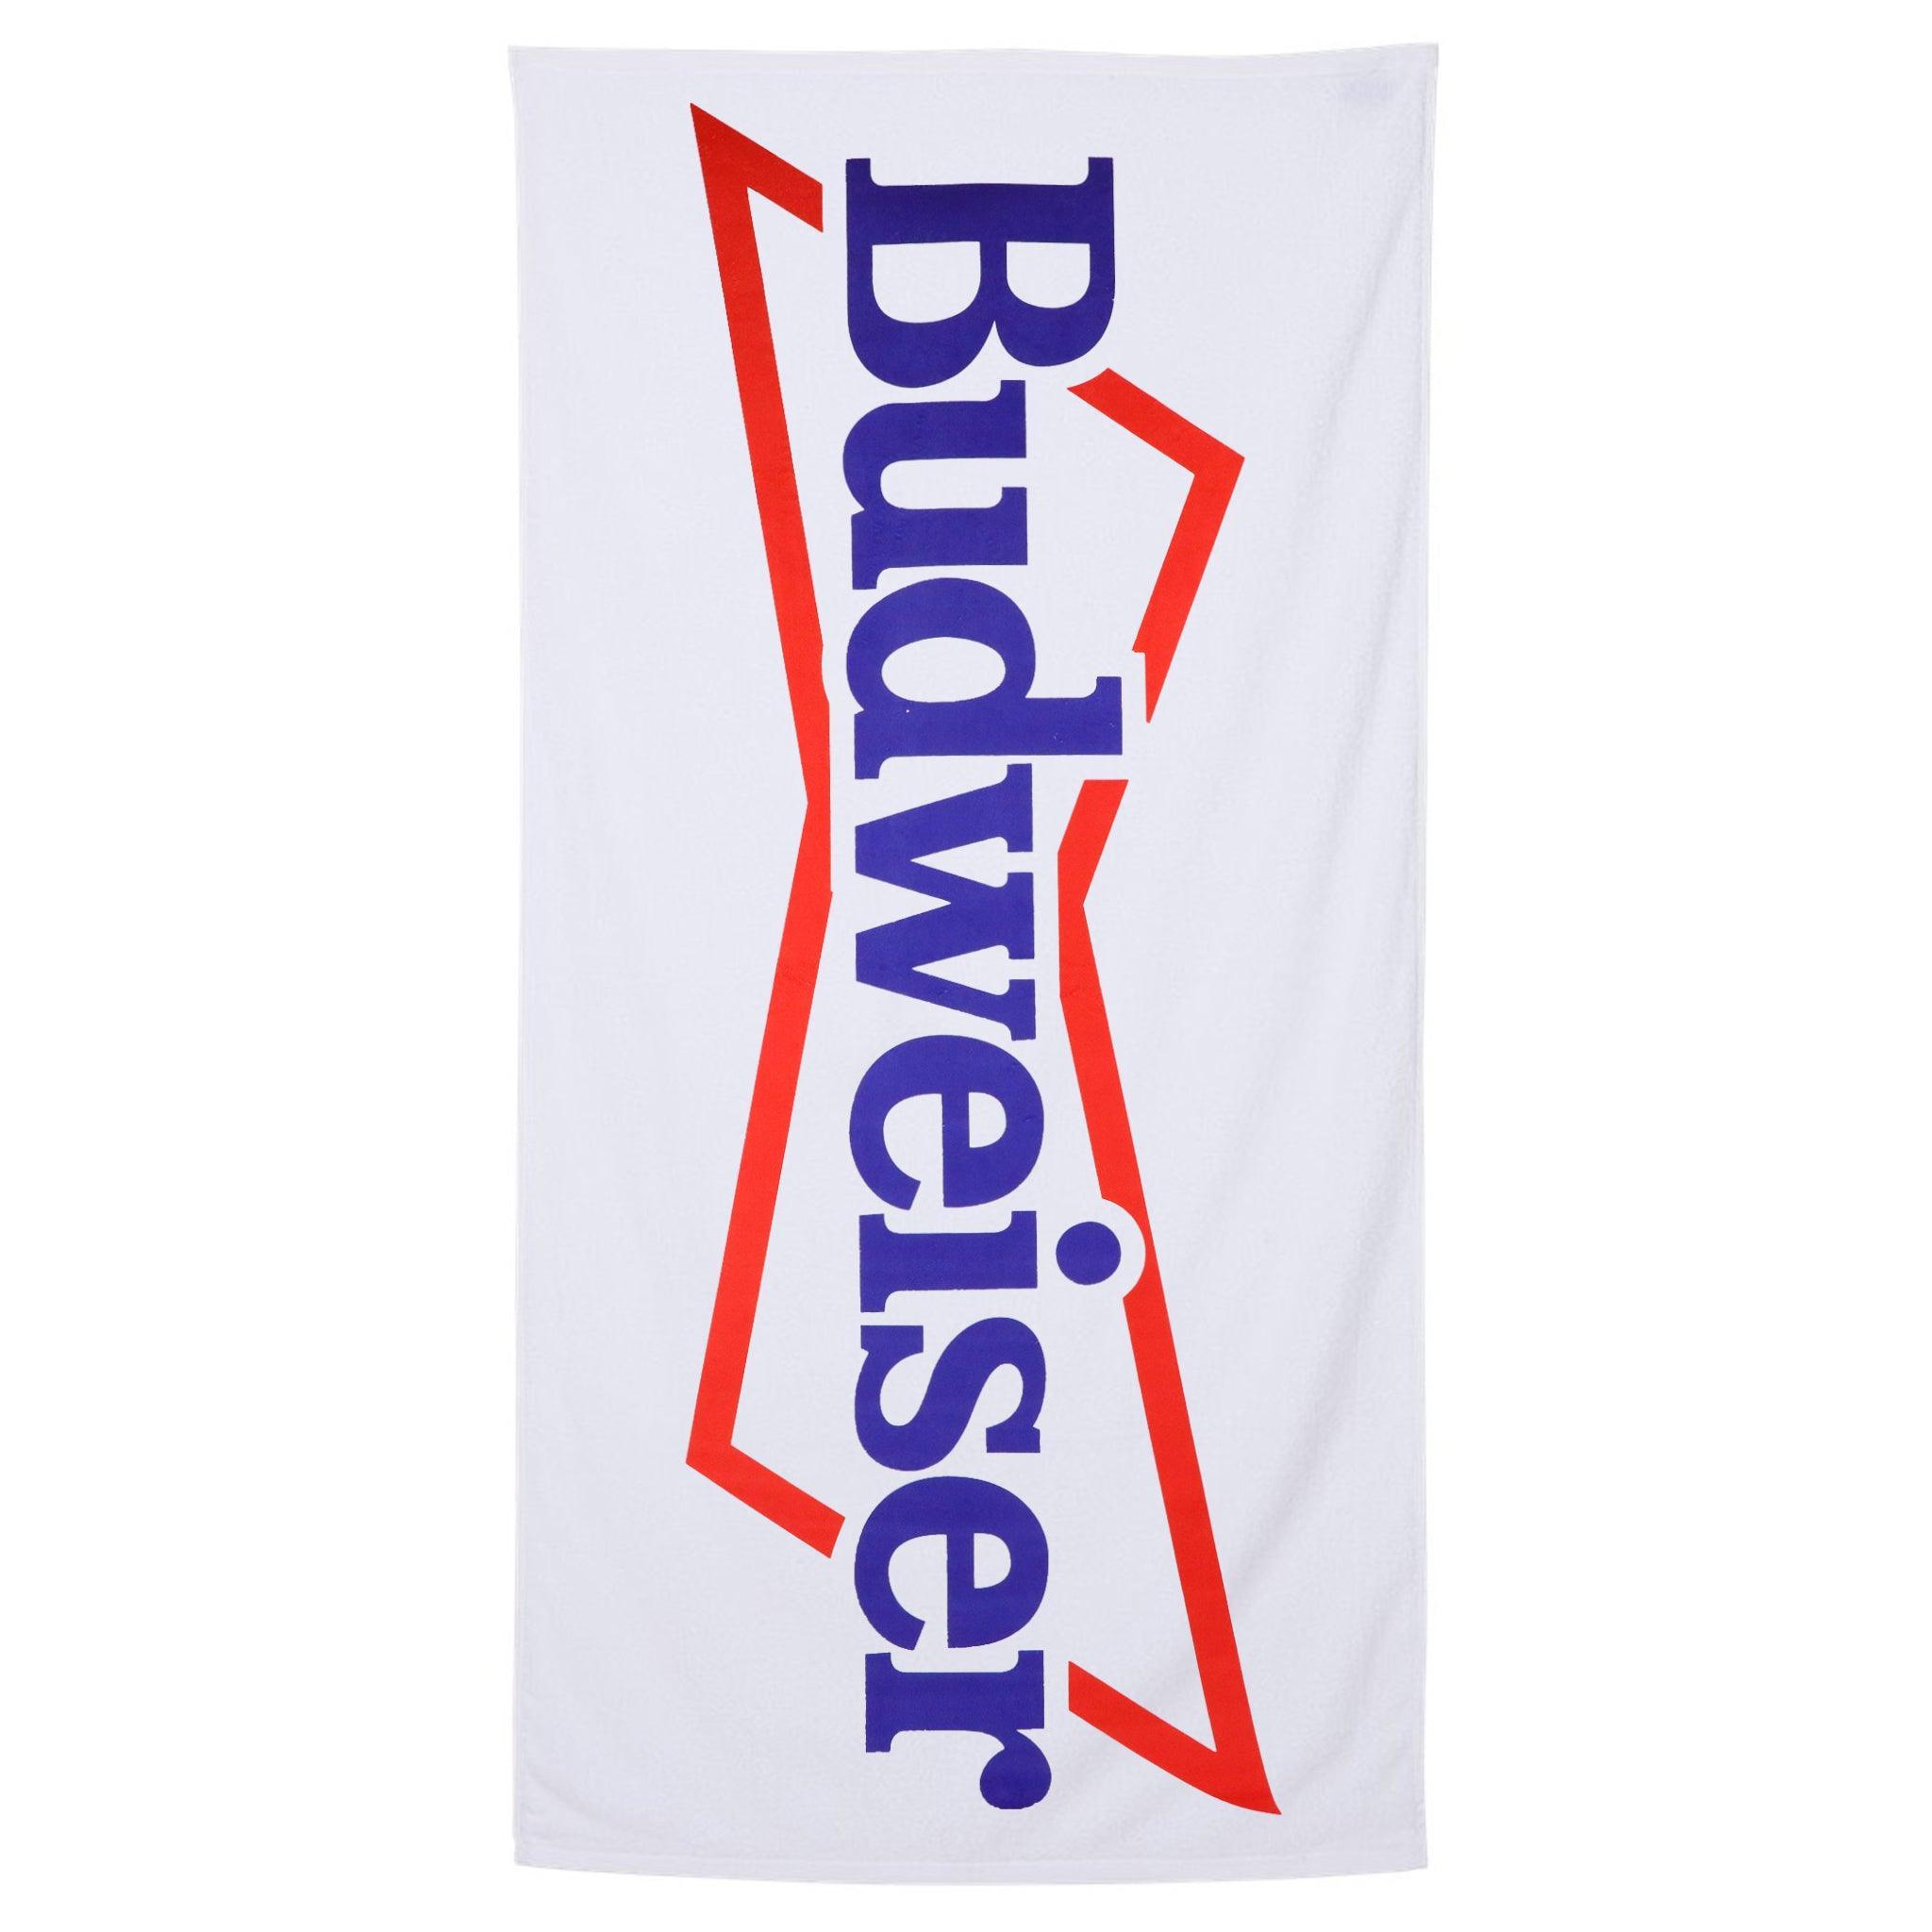 White beach towel with Budweiser logo with Bowtie outline around it. Budweiser logo goes the entire length of towel